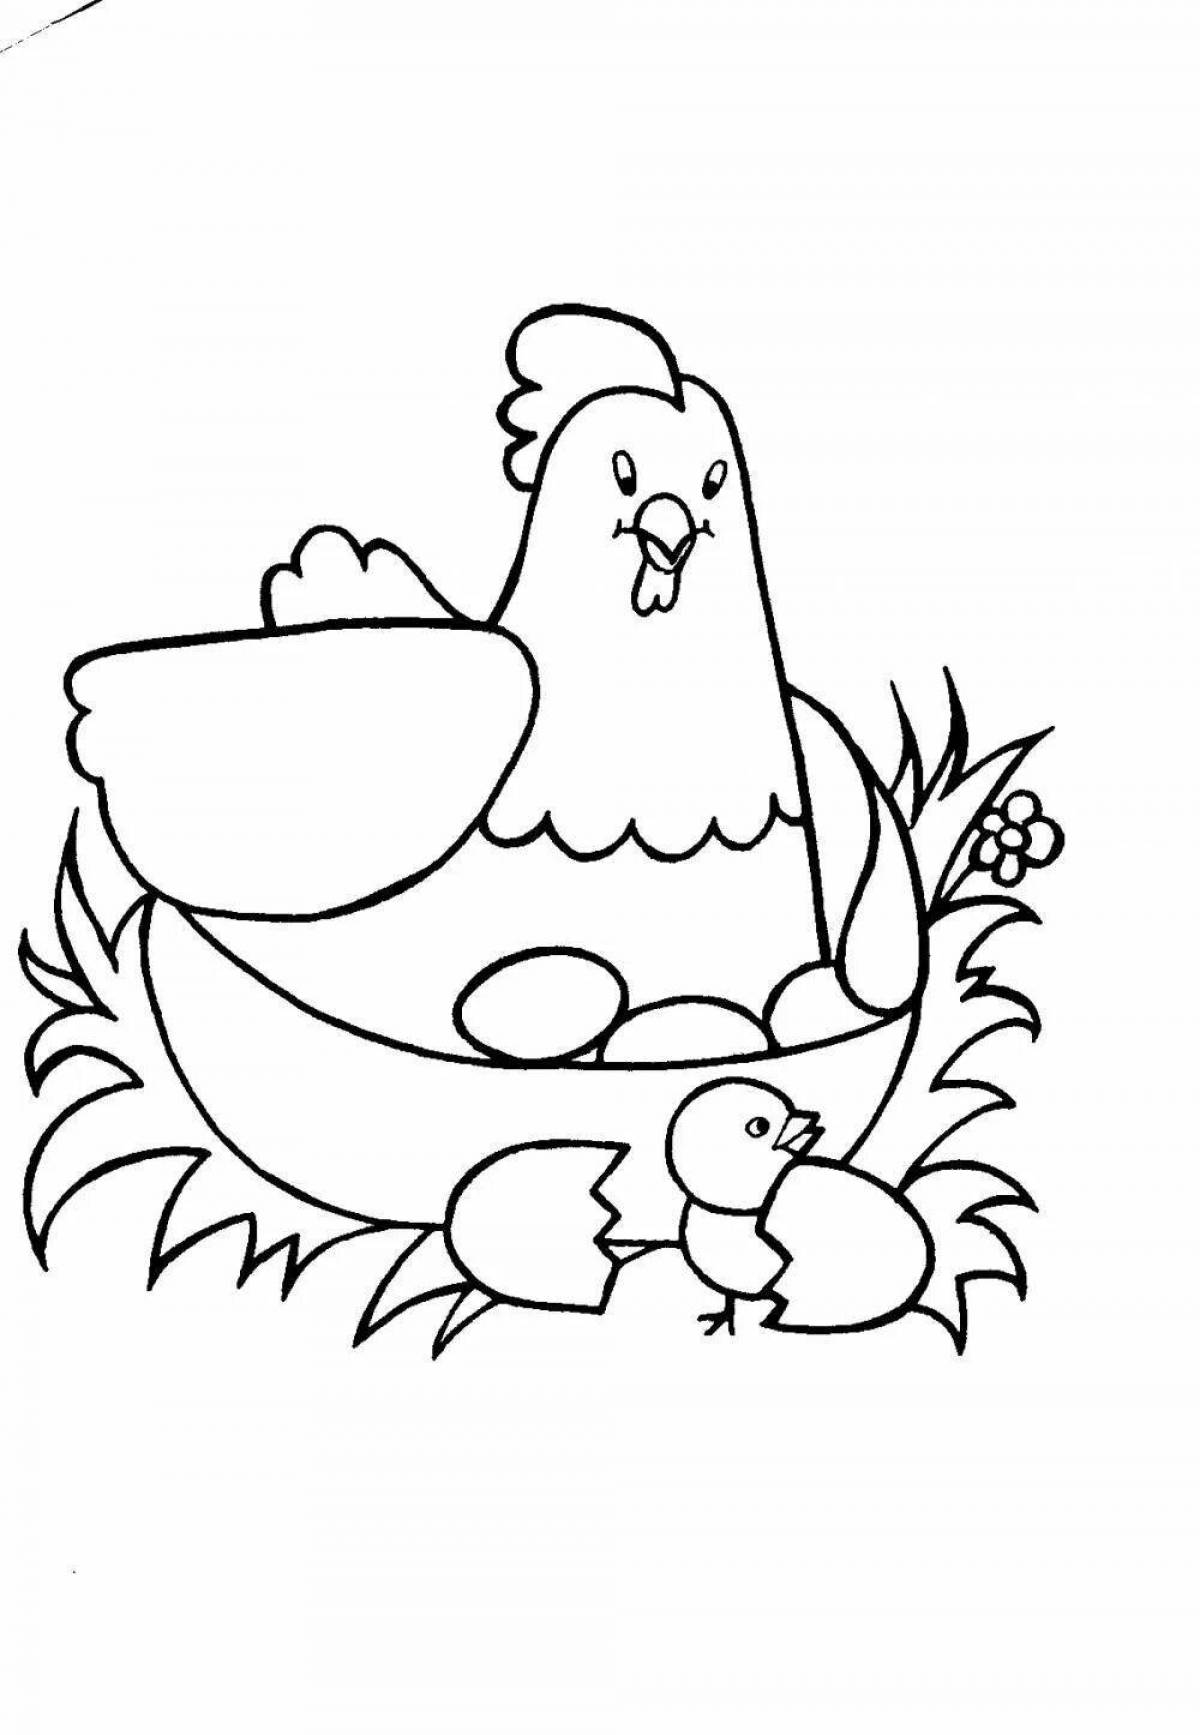 Innovative chicken ruffle coloring book for kids